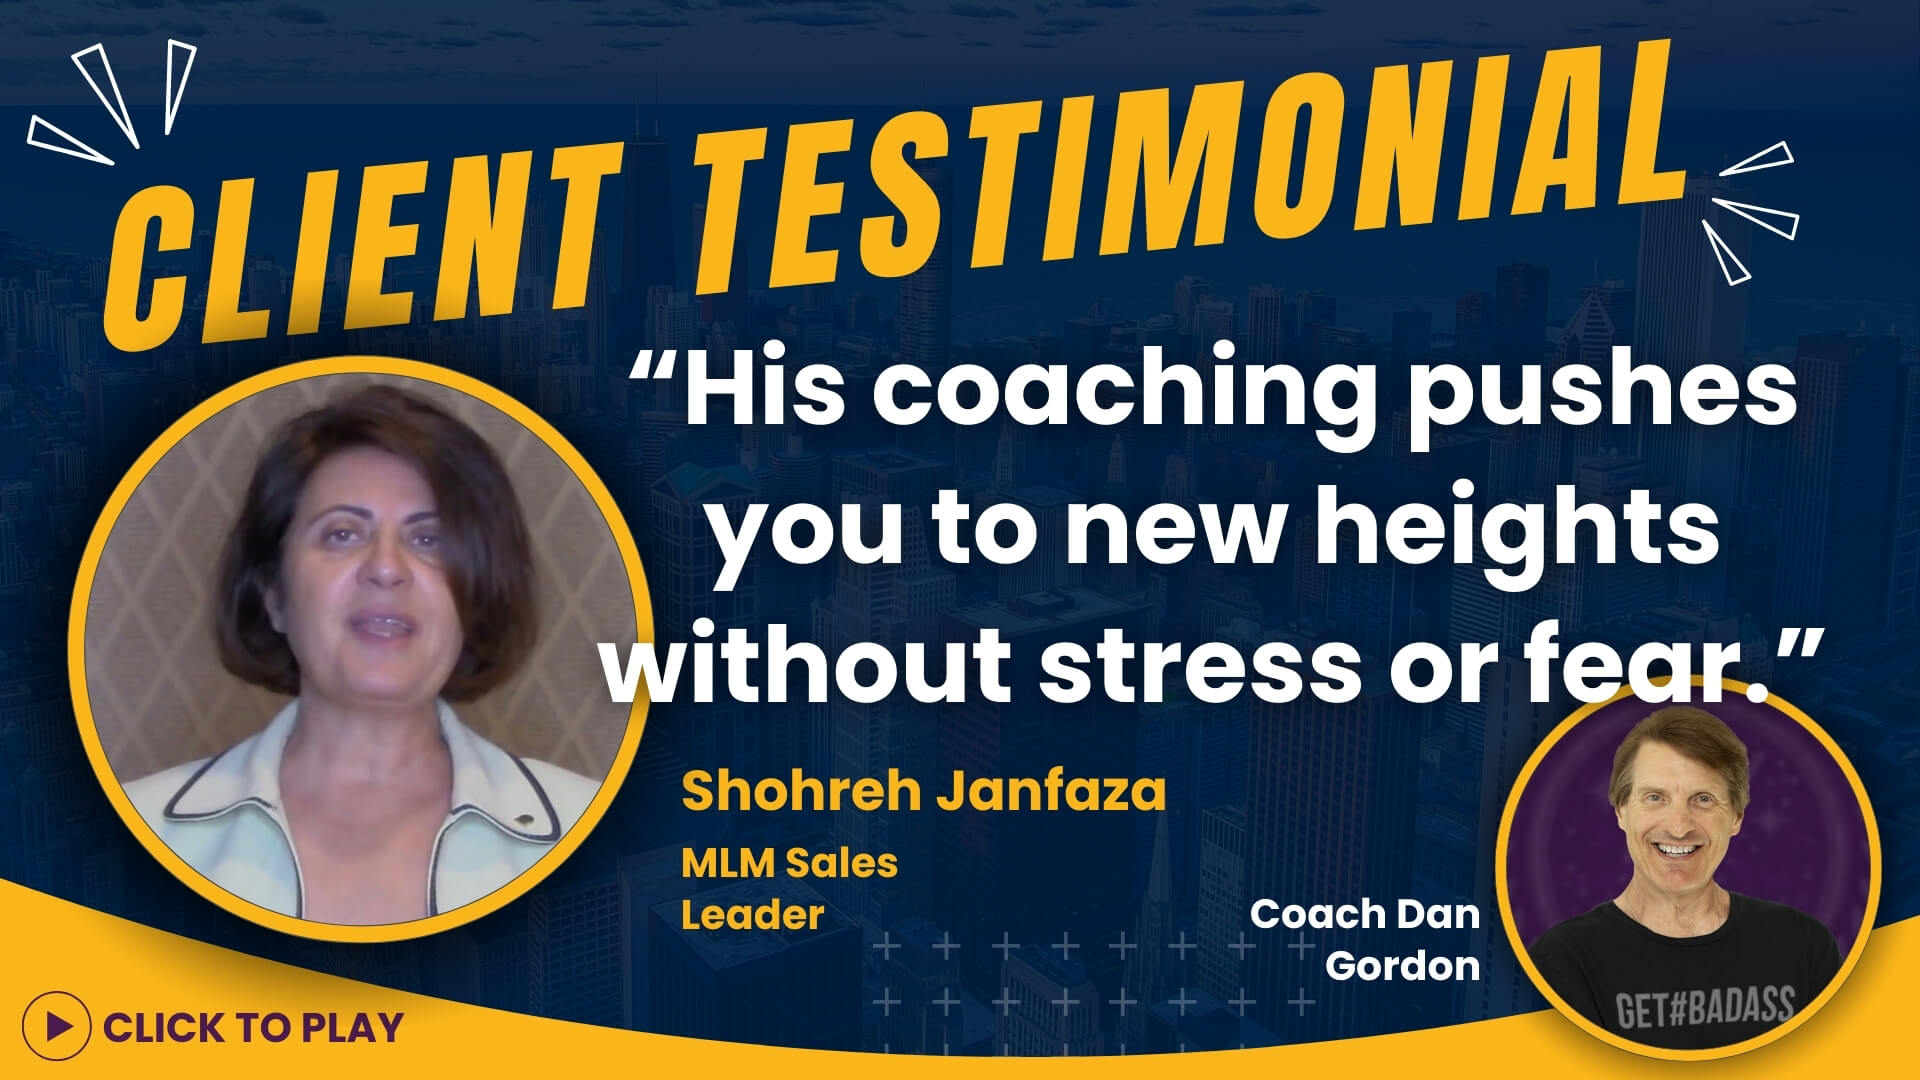 Shohreh Janfaza, a leader in direct sales, gives a video testimonial for Coach Dan Gordon, emphasizing his role in elevating her career in multi-level marketing without stress or fear.